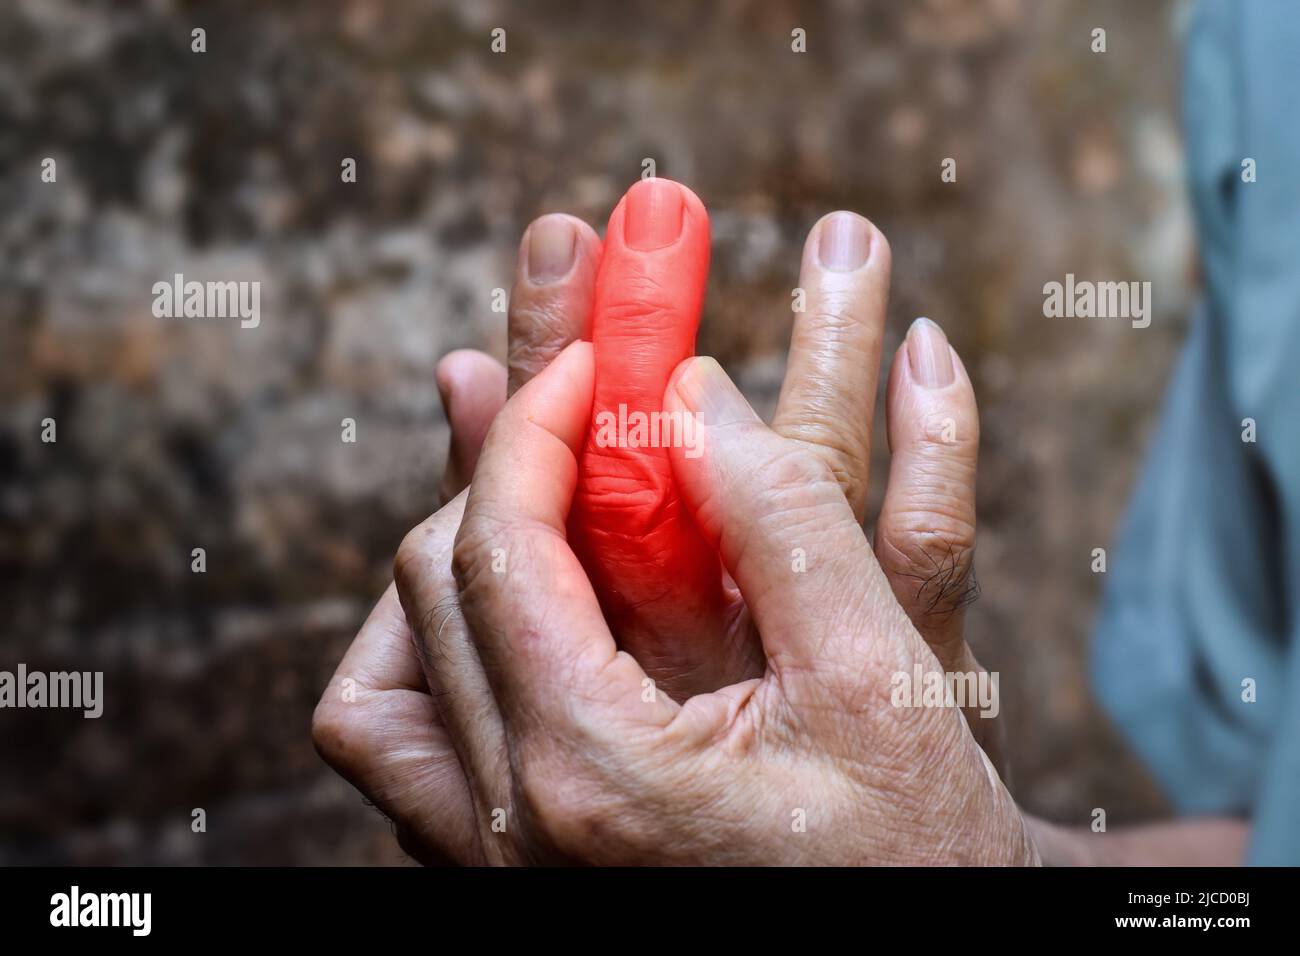 Inflammation of Asian old man middle finger and hand. Concept of cellulitis and finger problems. Stock Photo